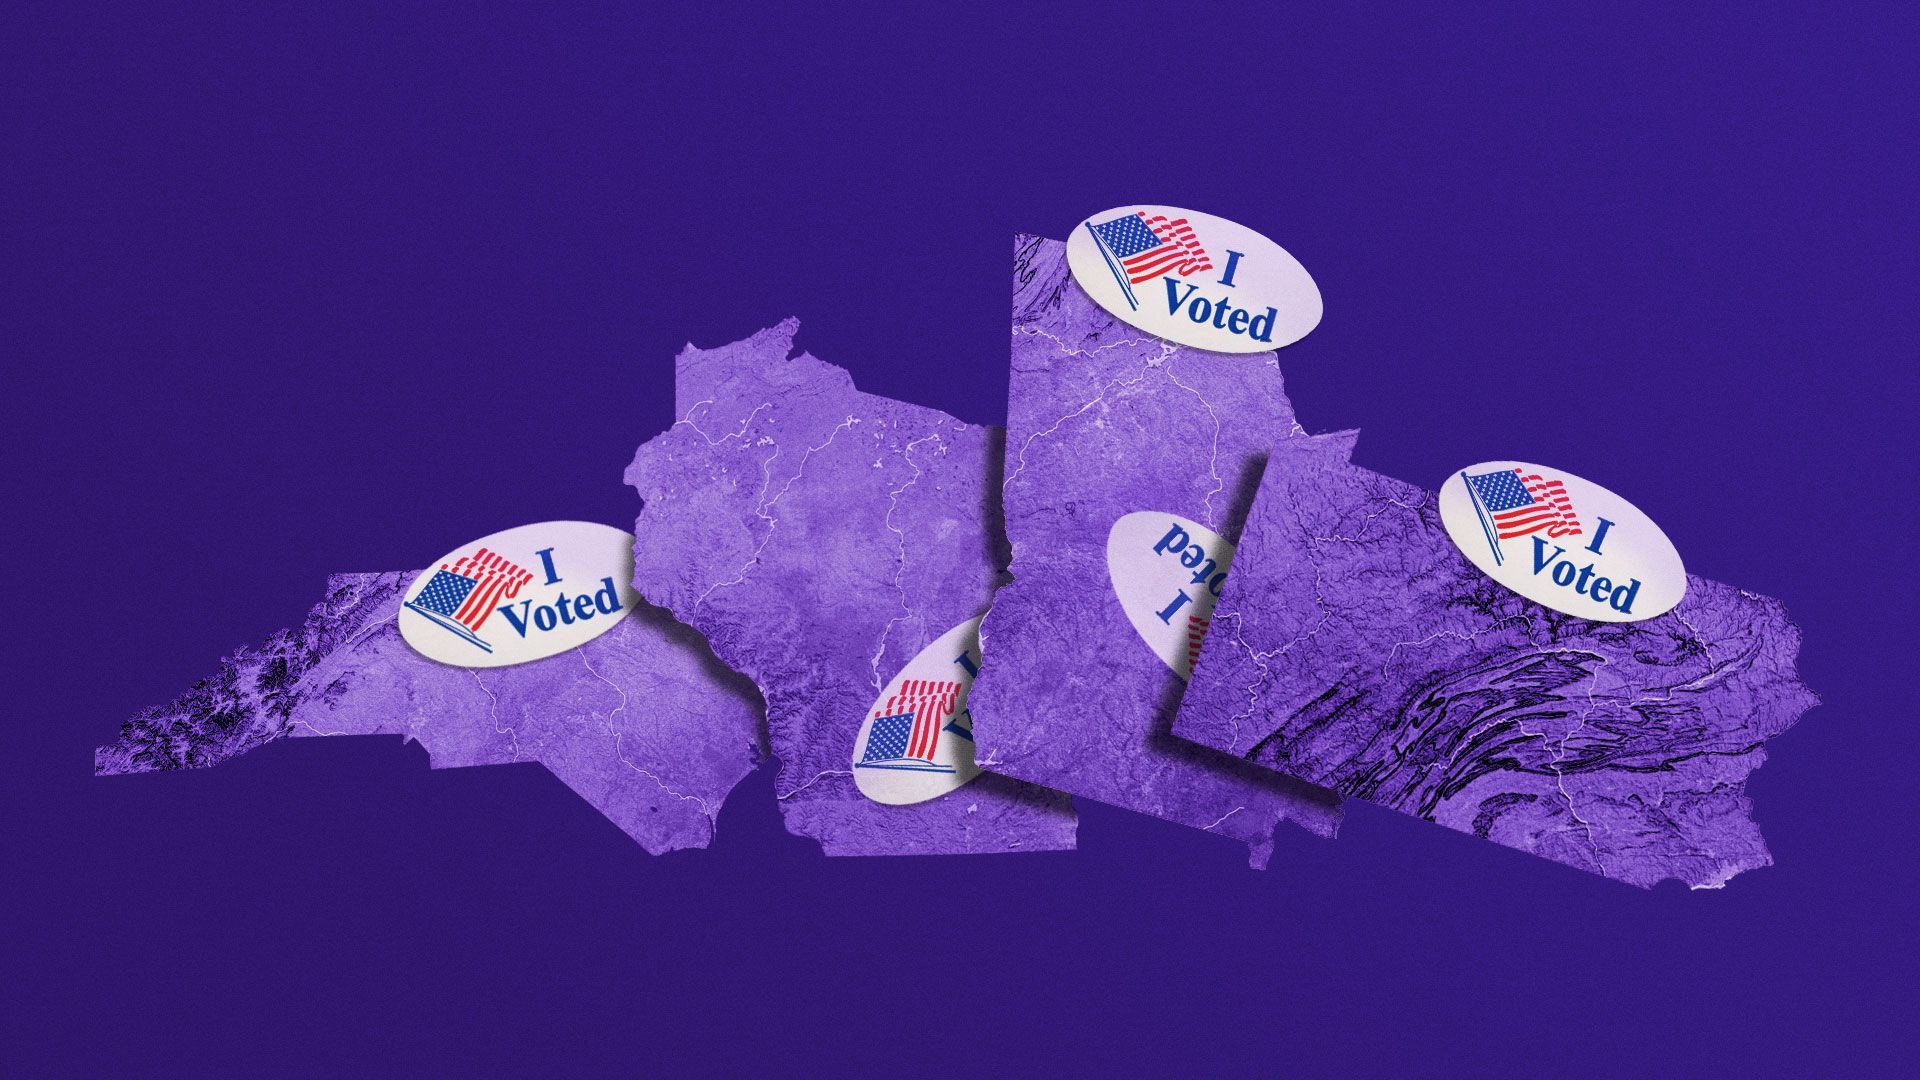 Illustration of Pennsylvania, Wisconsin, North Carolina and Georgia with “I voted” stickers